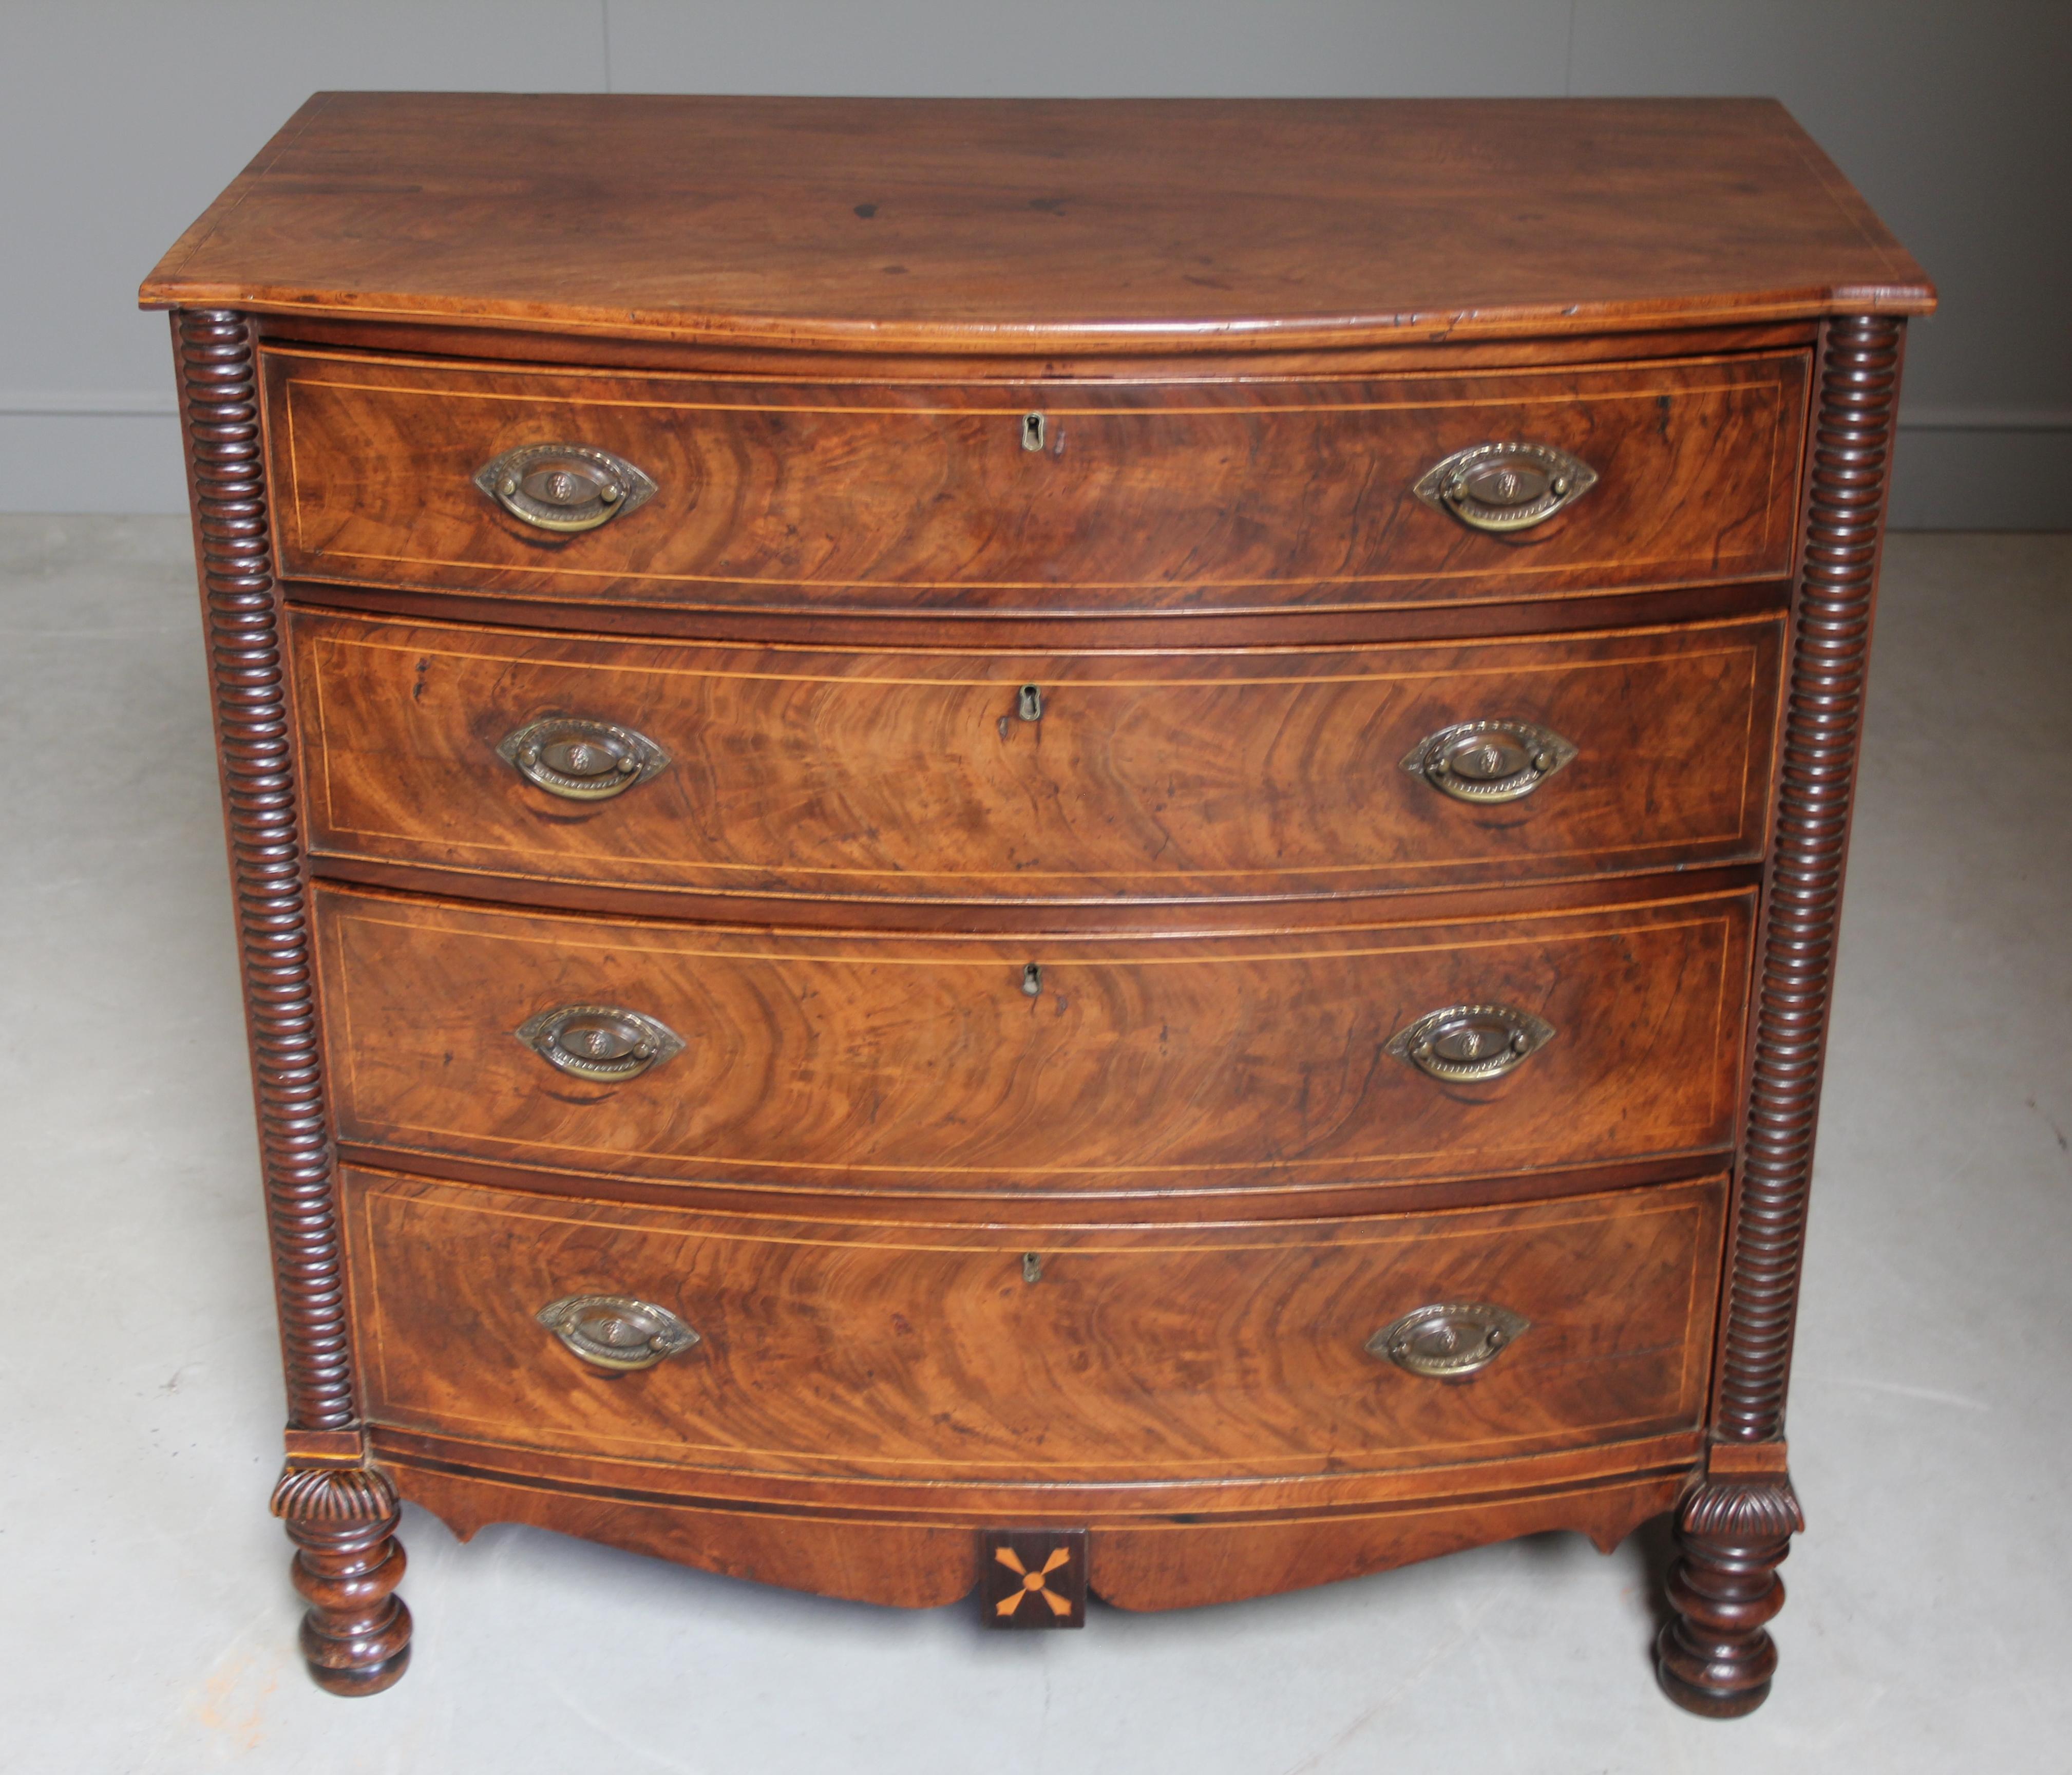 Early 19th Century William IV Mahogany Chest of Drawers